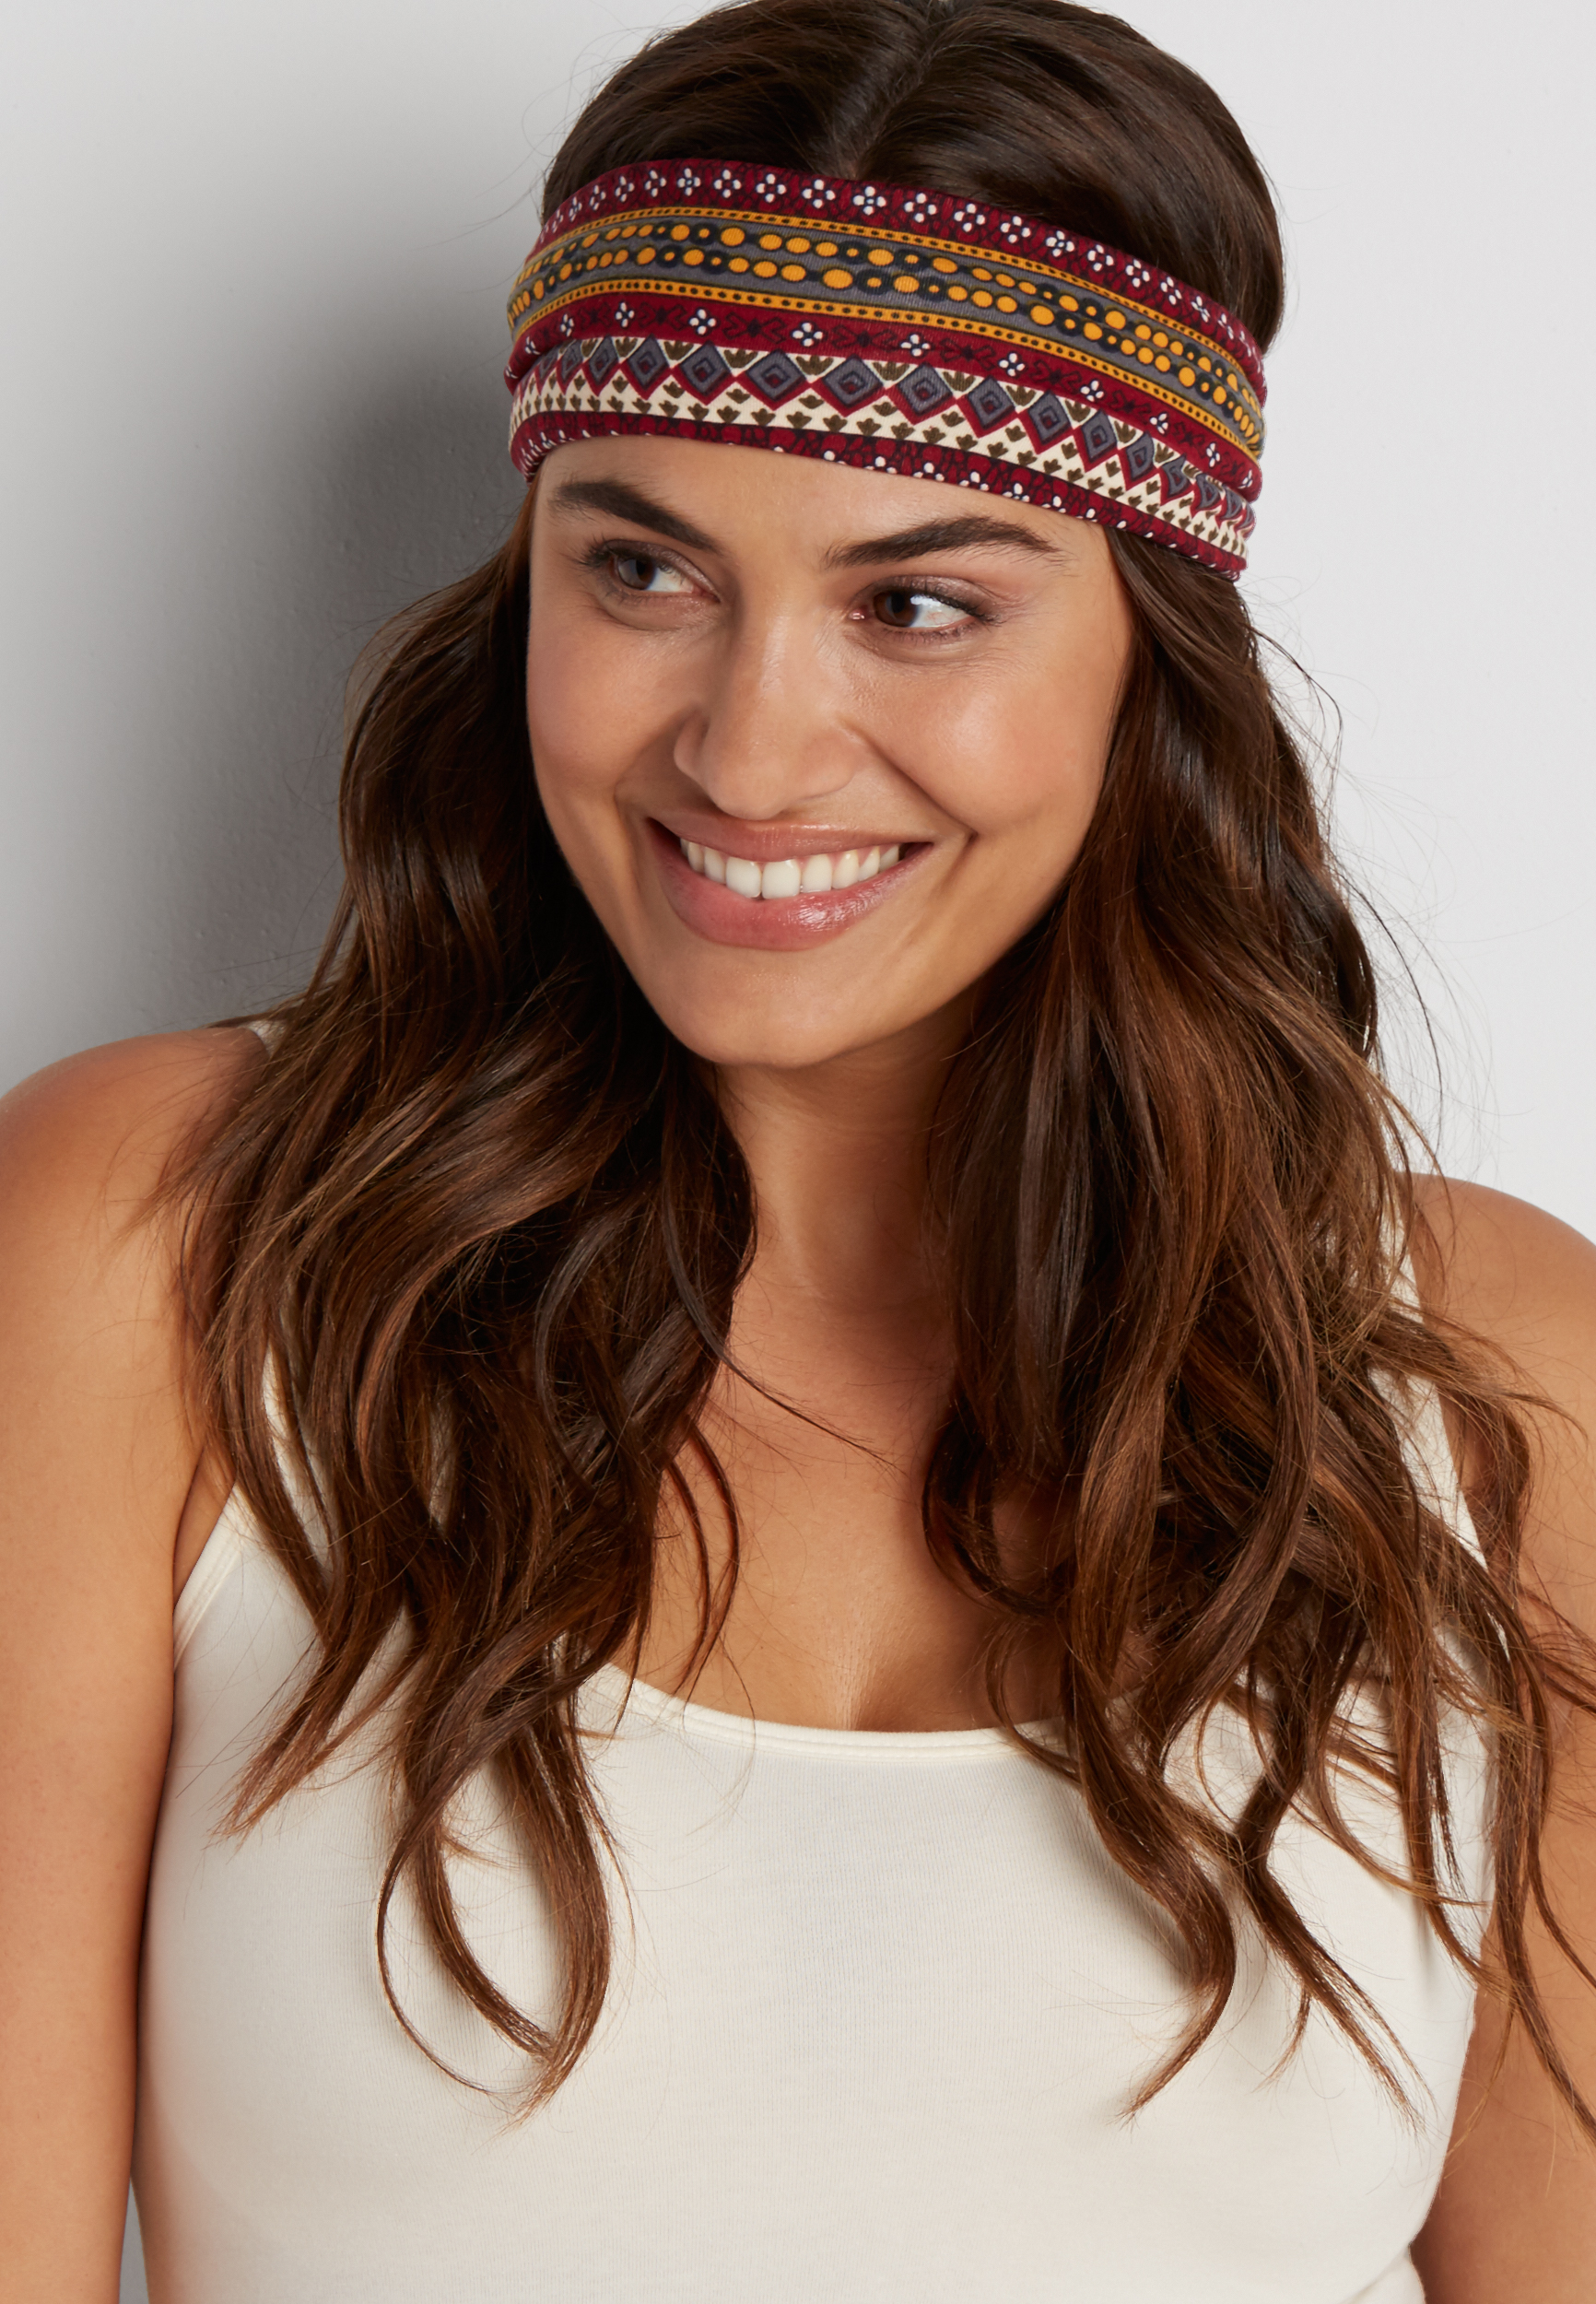 soft knit headwrap in multicolor pattern | maurices